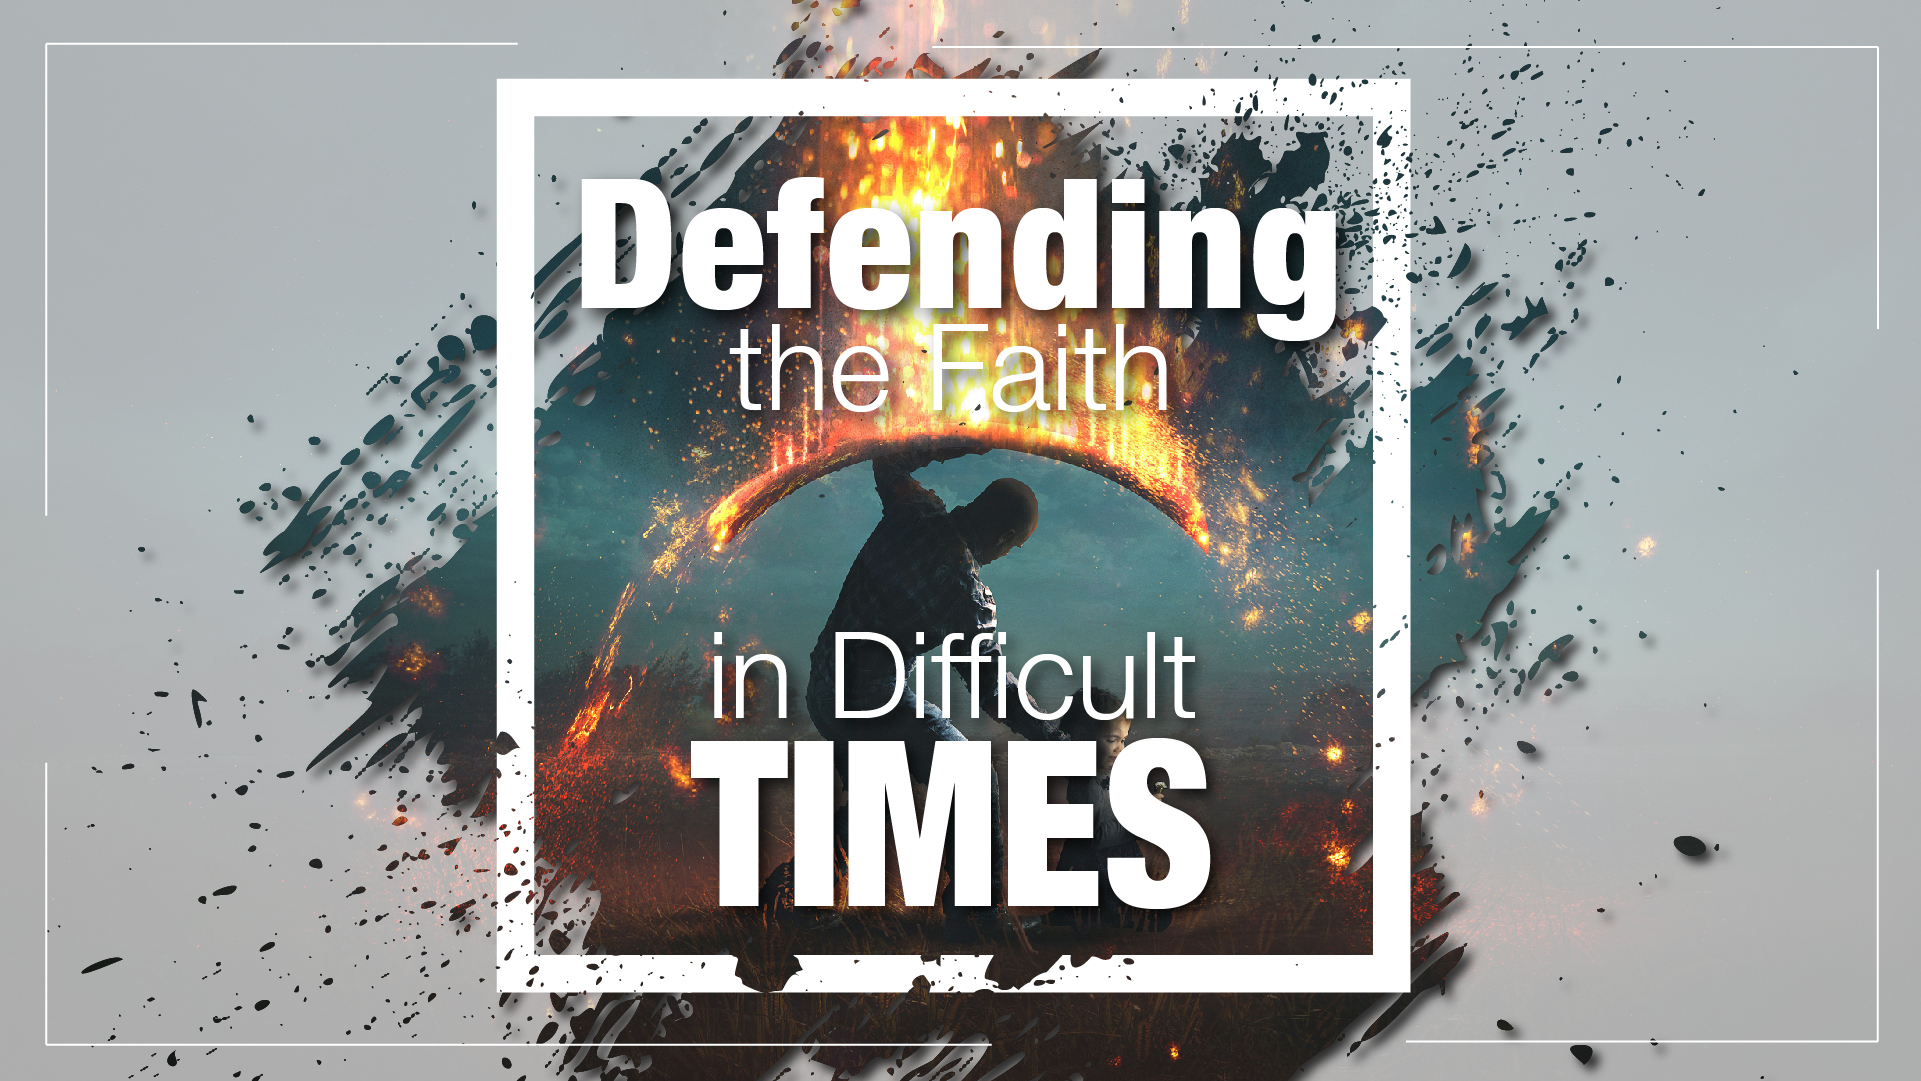 Defending the faith in Difficult Times